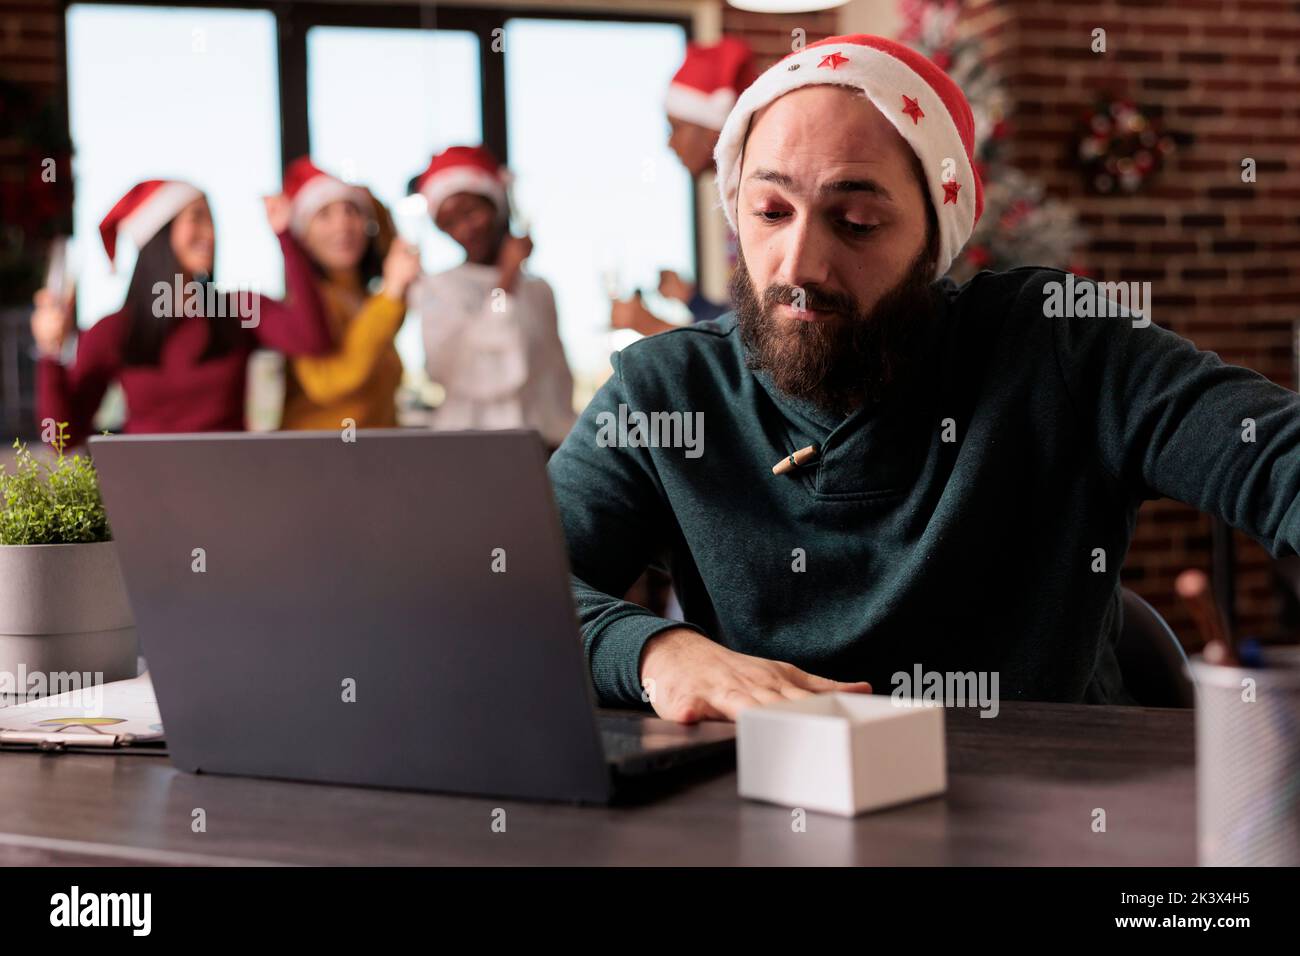 Company worker feeling disturbed at office job because of noisy coworkers celebrating christmas eve. Tired irritated employee being overwhelmed and working during winter holiday season. Stock Photo